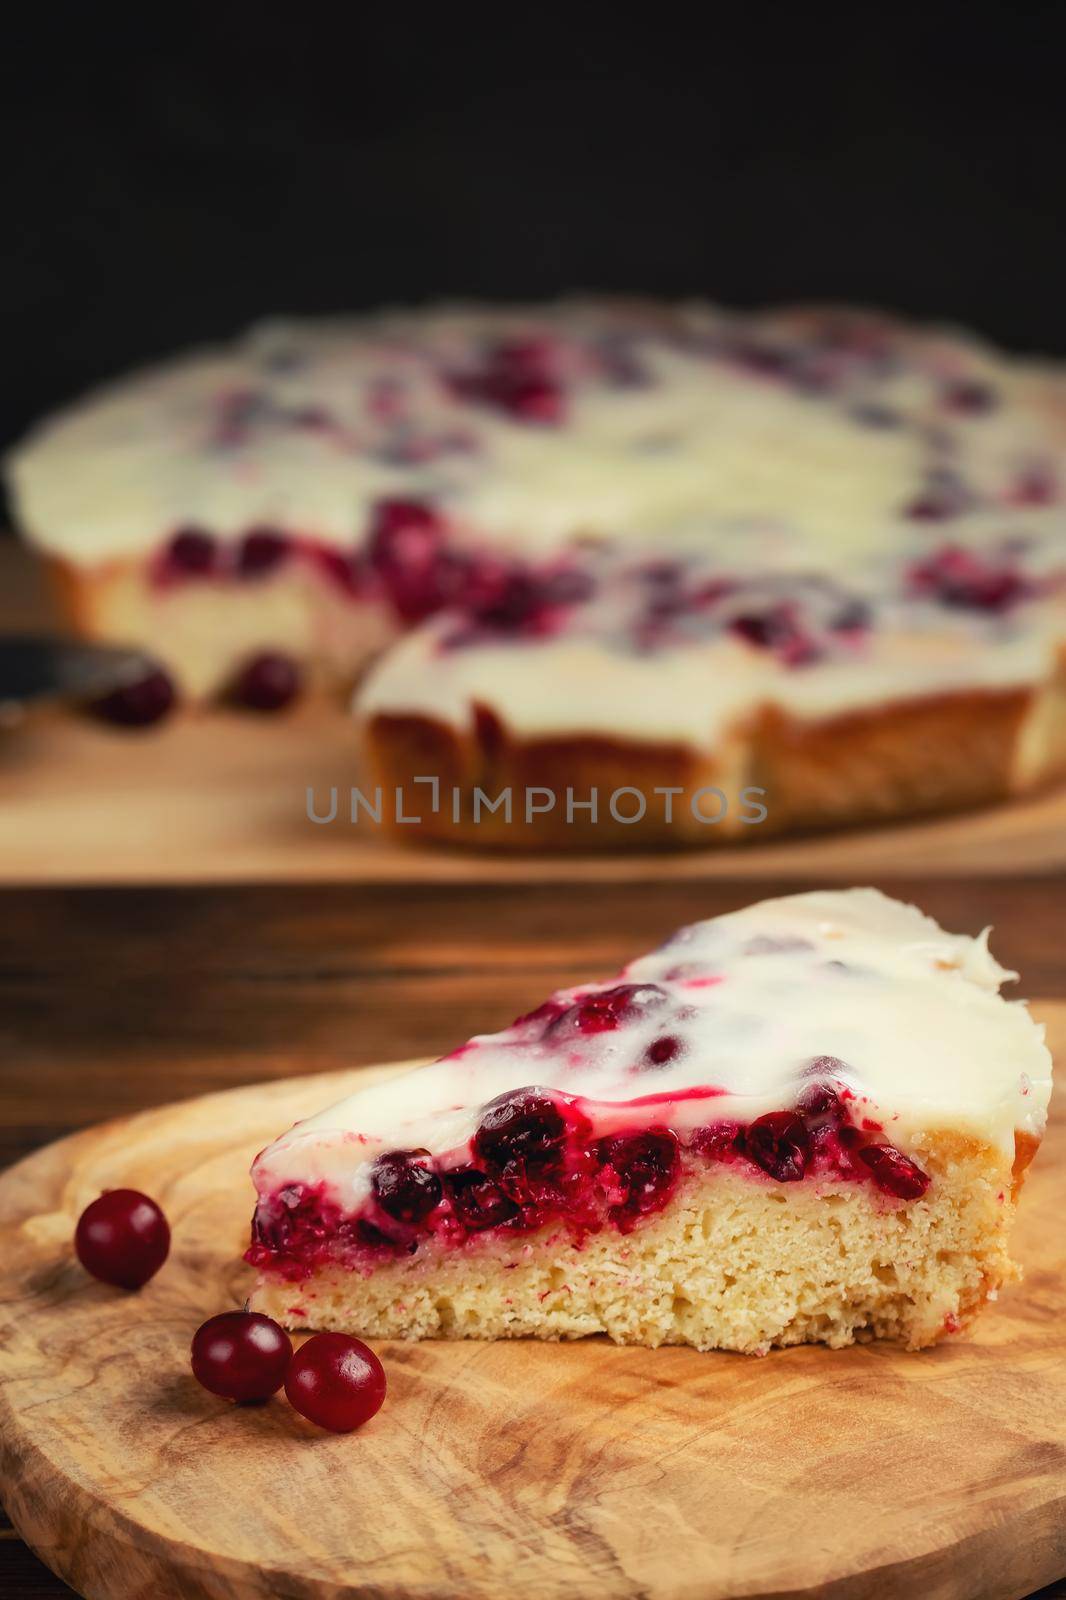 Homemade cake with cranberries and sour cream. Piece of pie close up. Vertical image.